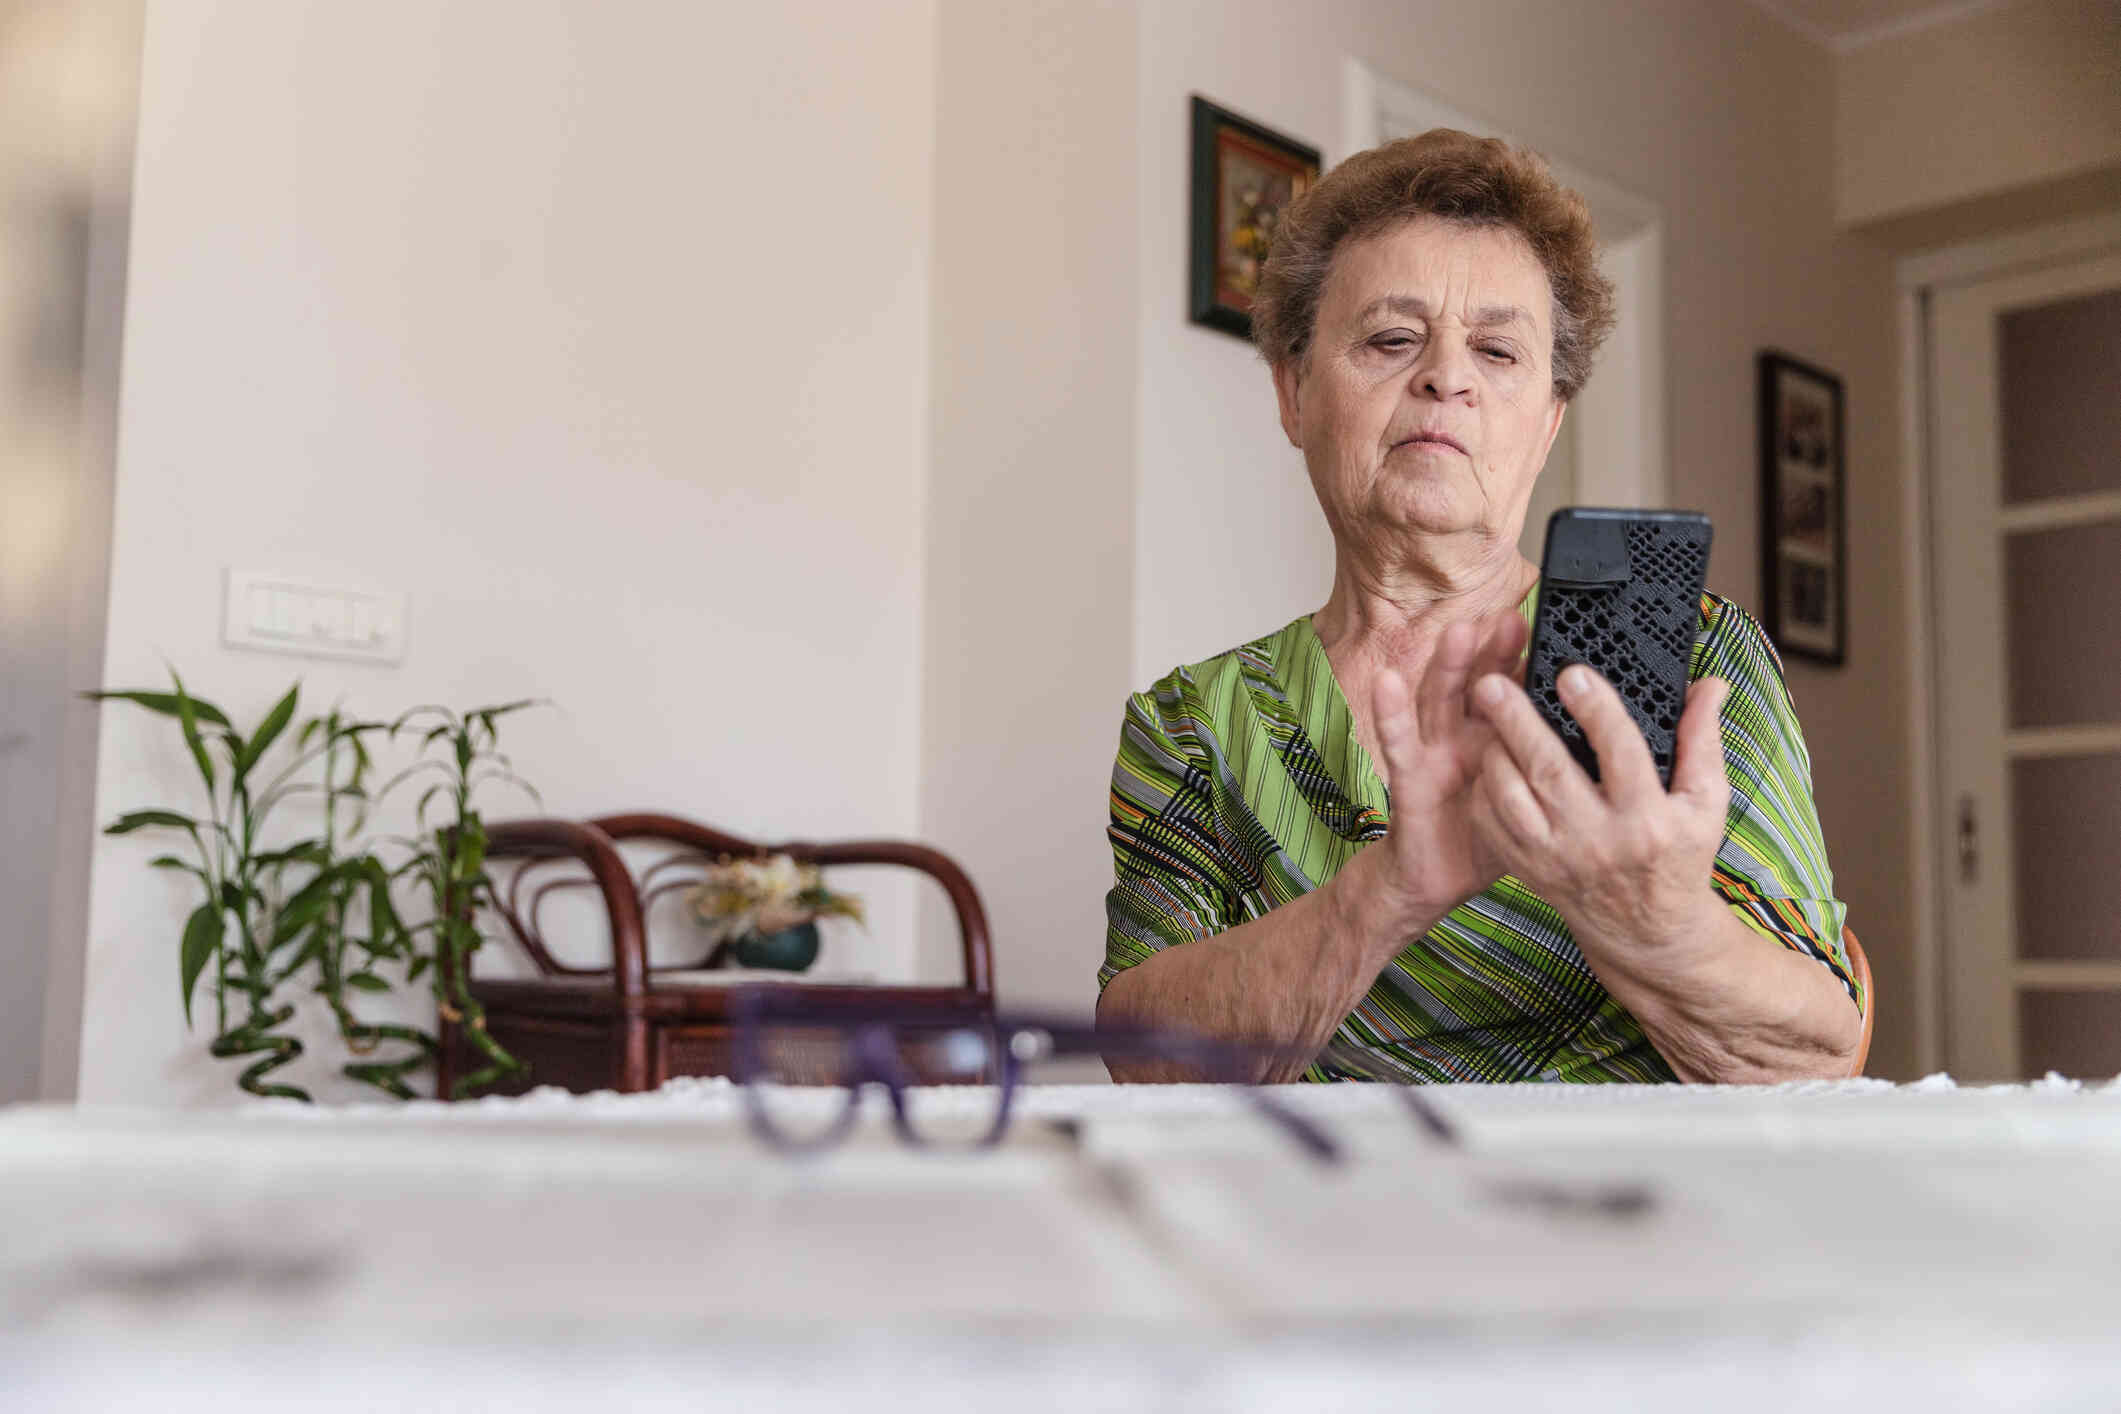 An elderly woman in a green shirt sits at the kitche table and taps on the cellphone in her hand with a focused expression.